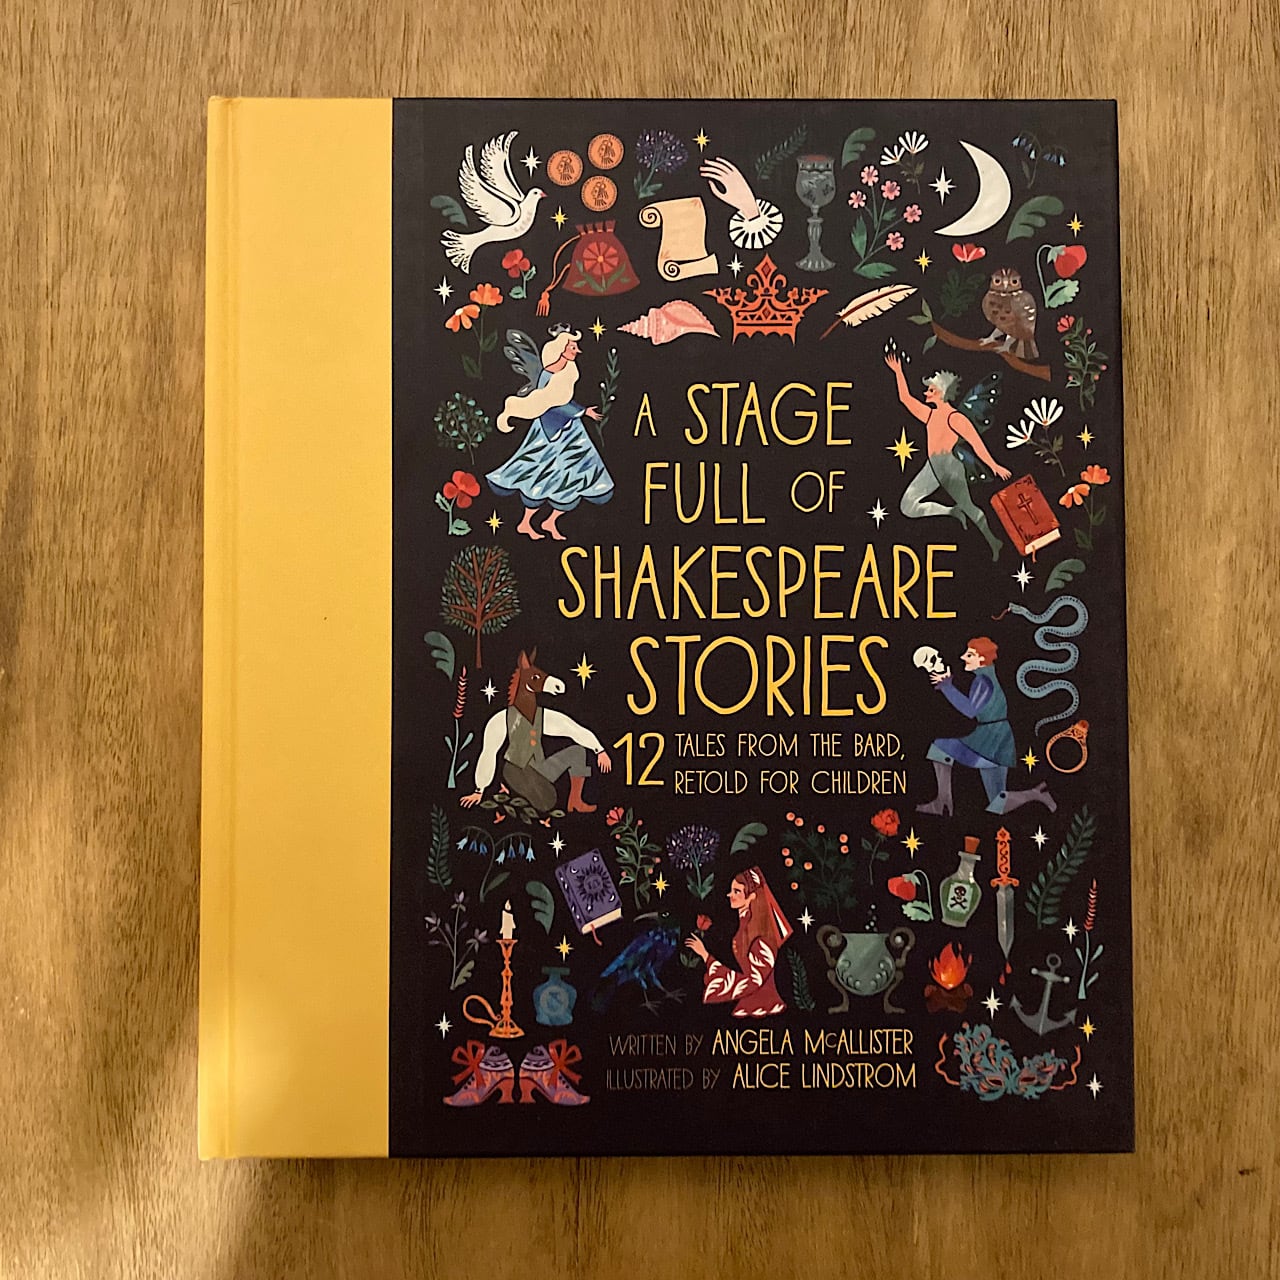 A Stage Full of Shakespeare Stories: 12 Tales from the World's Most Famous  Playwright 素敵な洋書の絵本屋さん Read Leaf Books